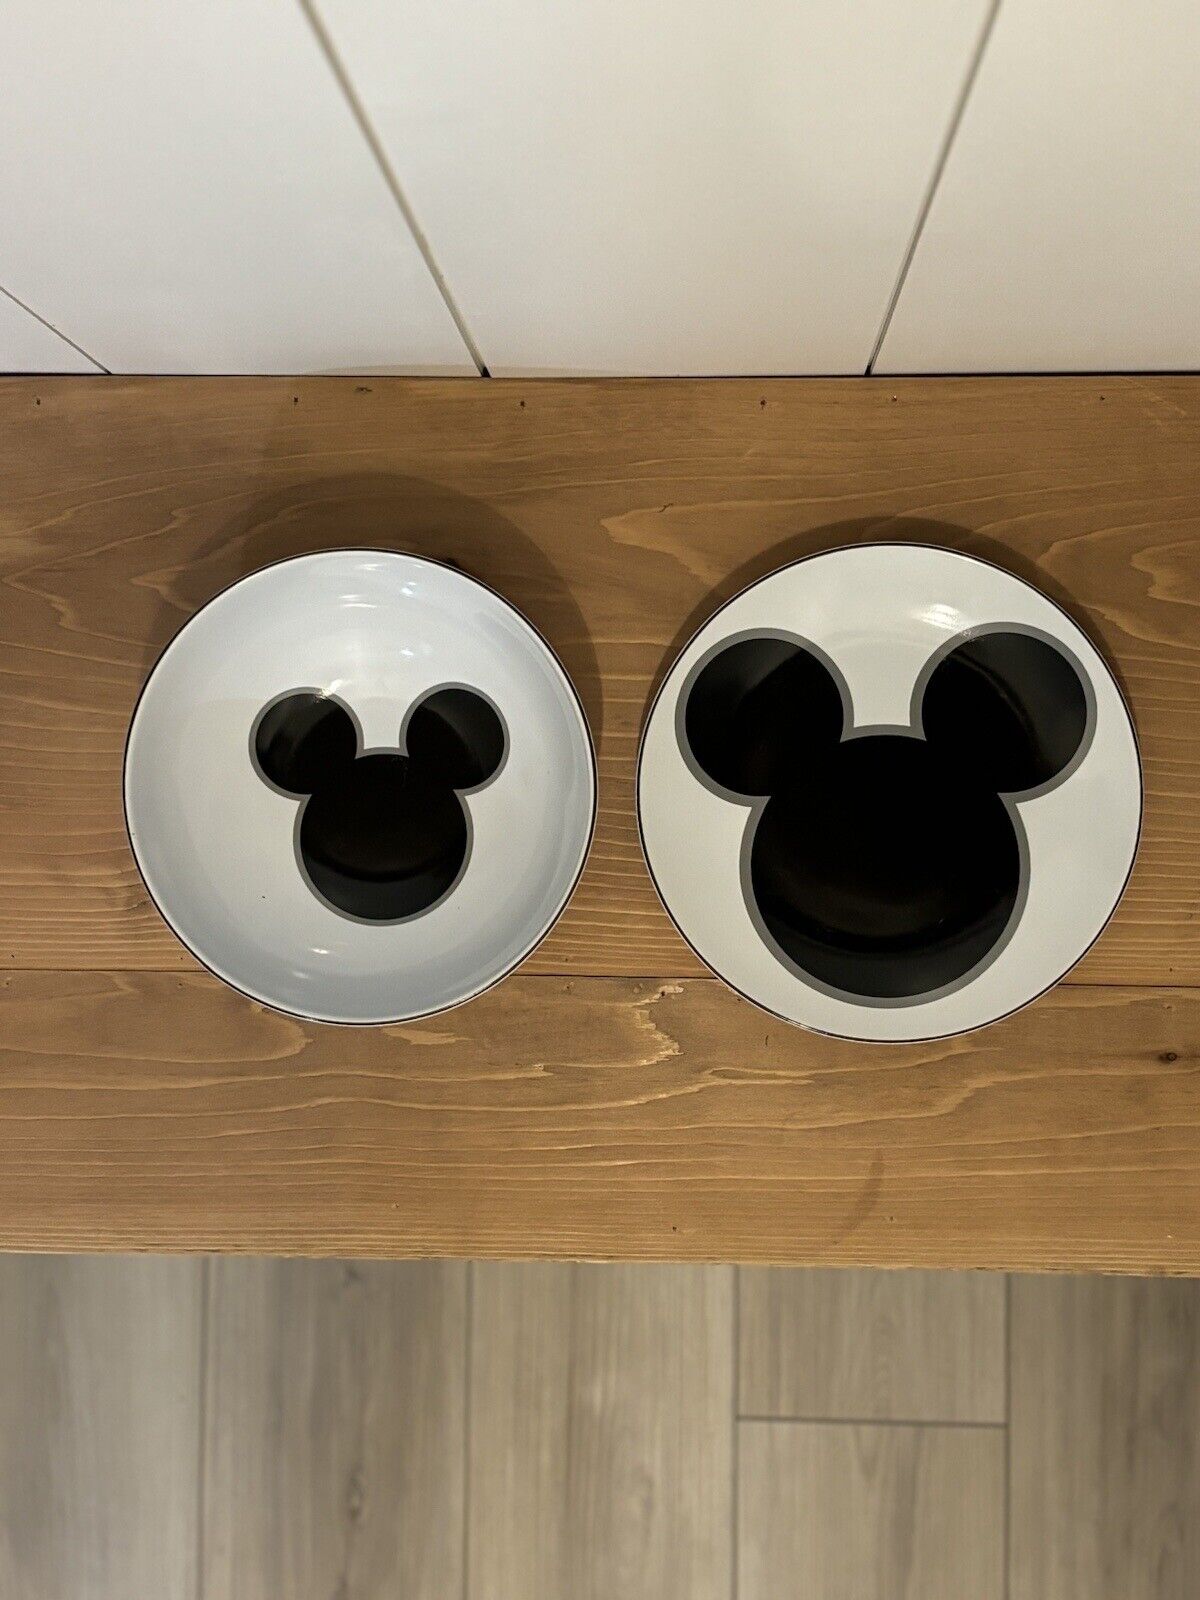 Disney Mickey Mouse Body Parts Salad Plate And Bowl Set Wall Decor Dishes